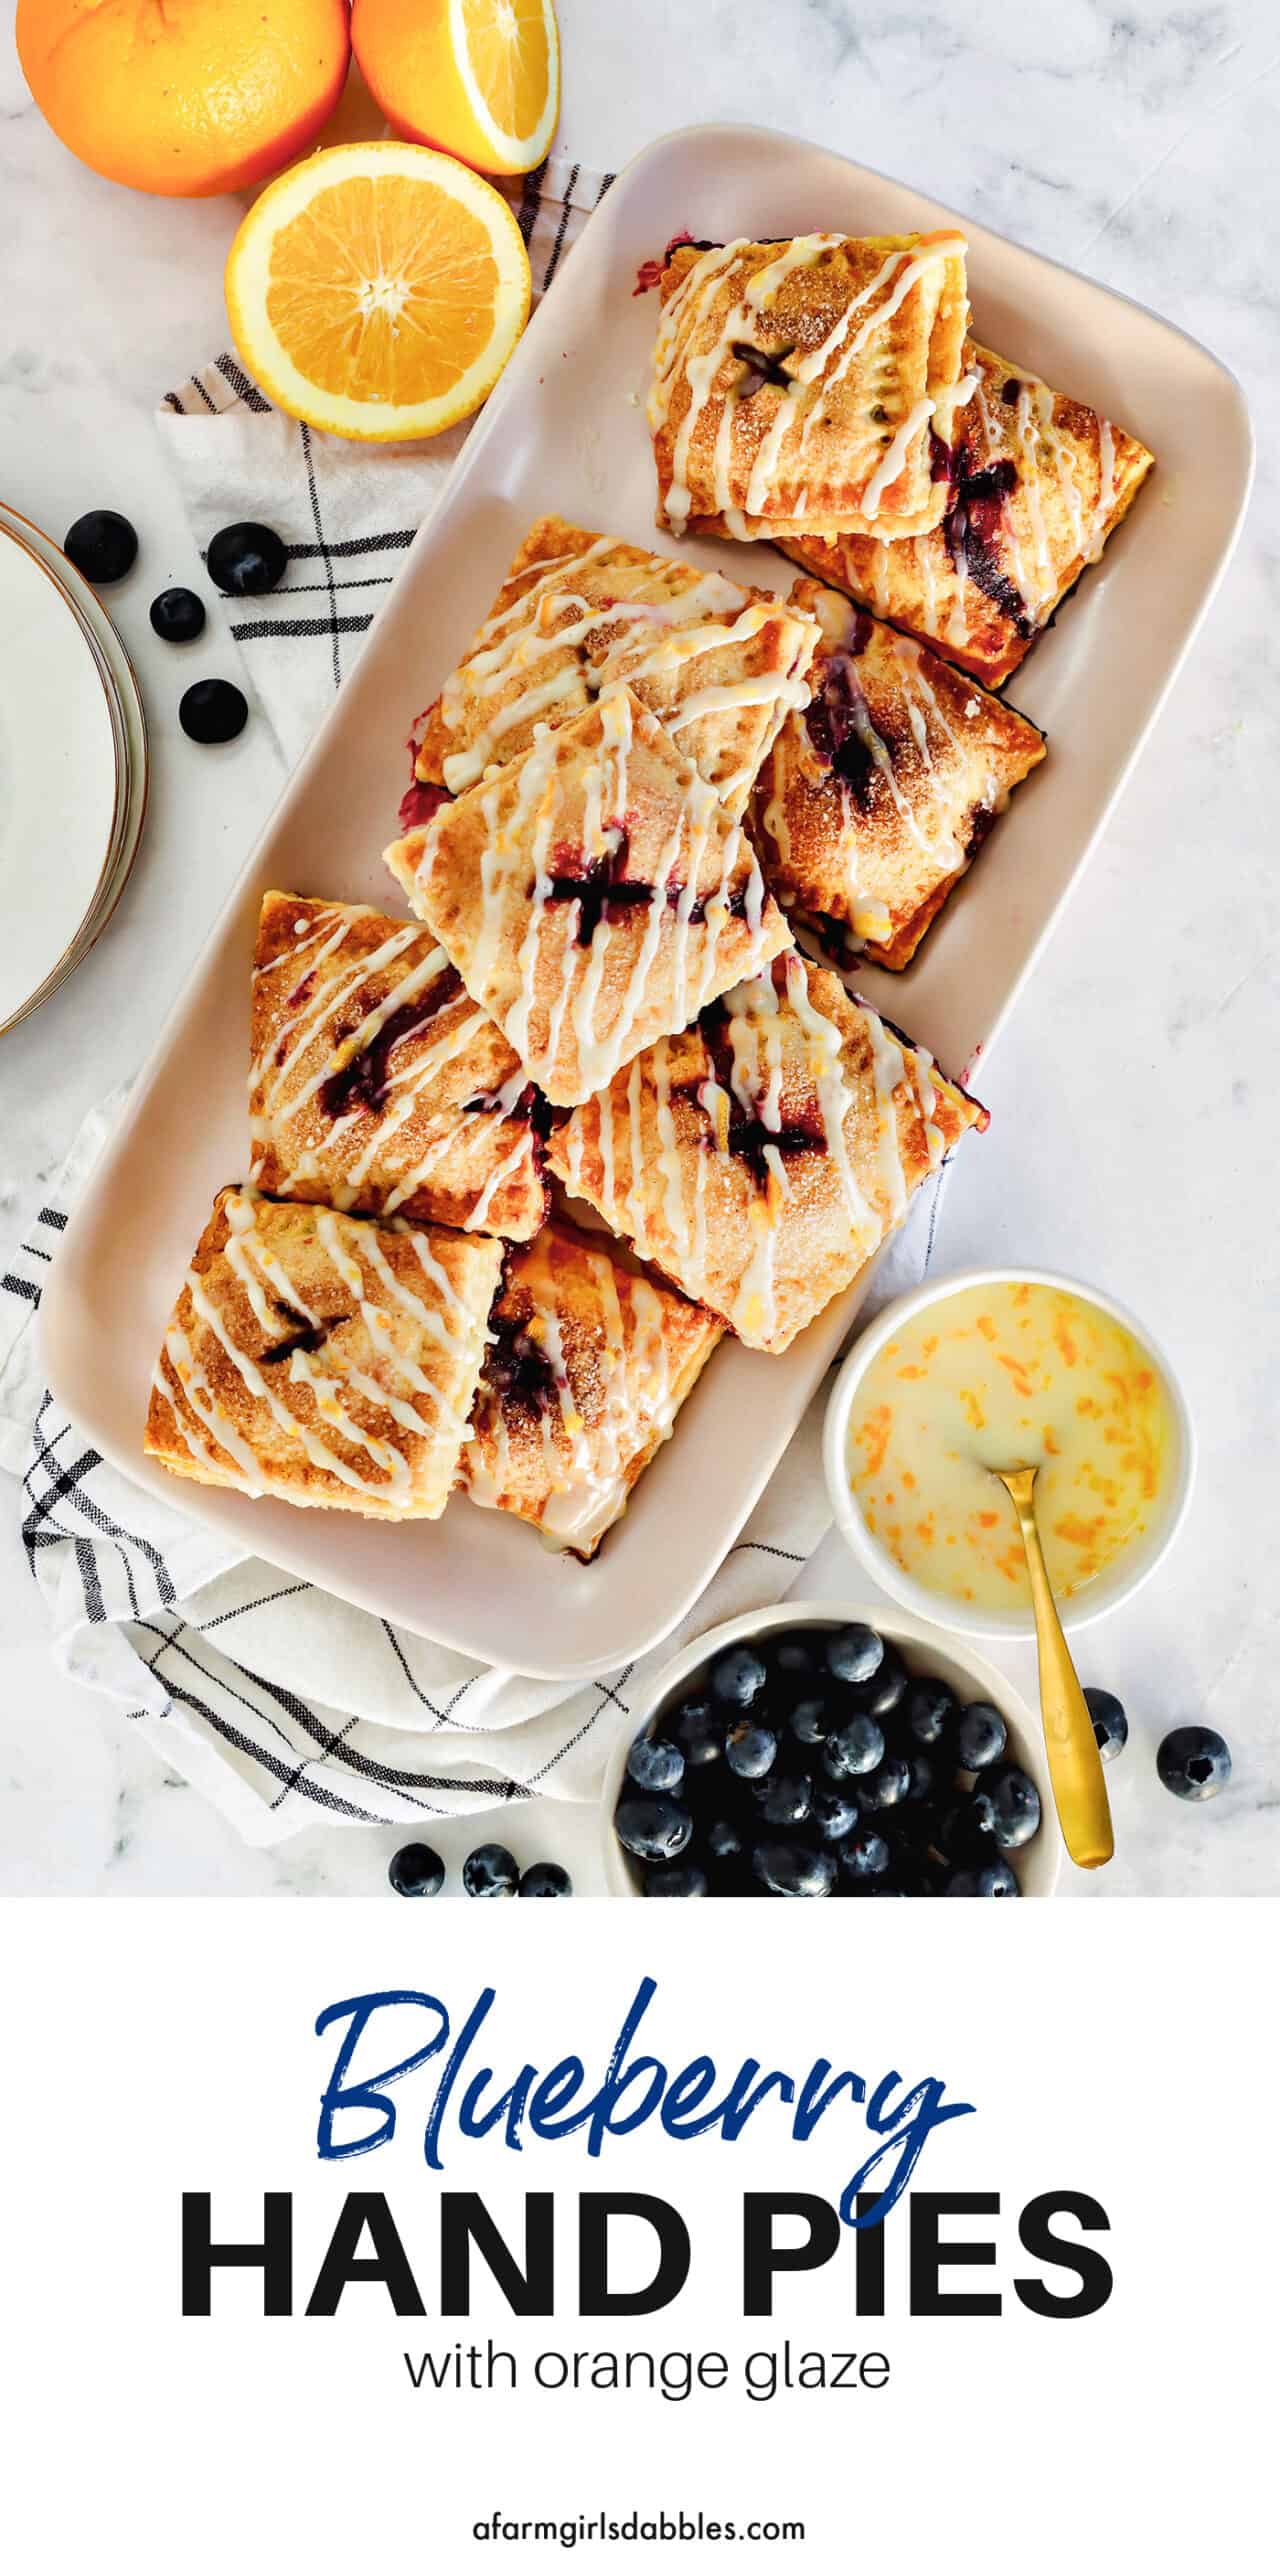 Pinterest image for blueberry hand pies